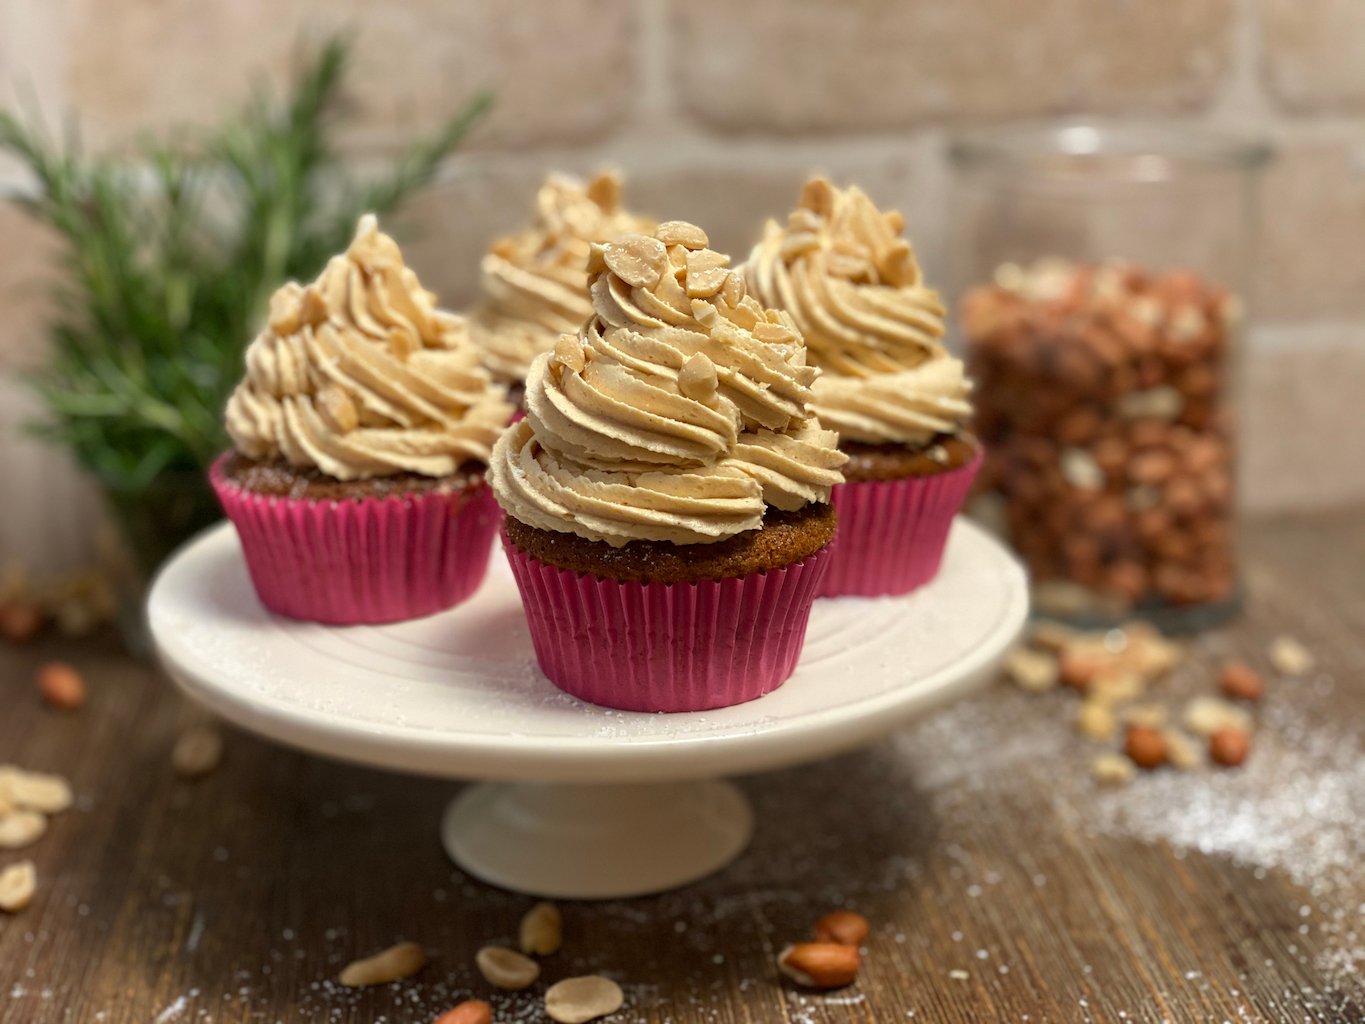 Spiced Cupcakes with Peanut Butter Cream Cheese Frosting 8 | Stay at Home Mum.com.au